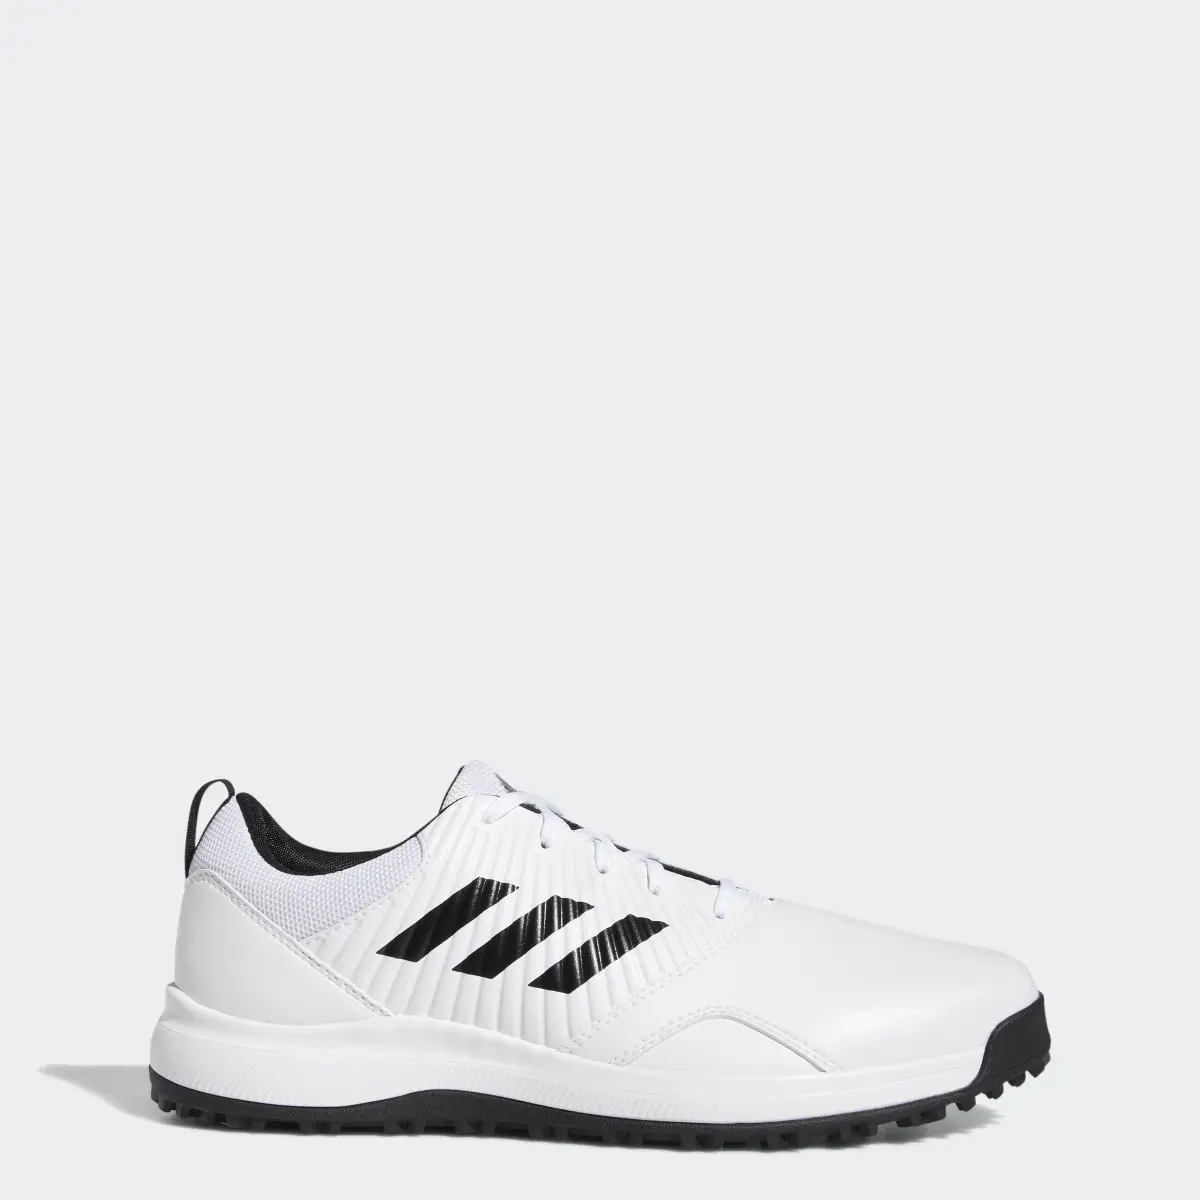 Adidas CP Traxion Spikeless Golf Shoes. 1